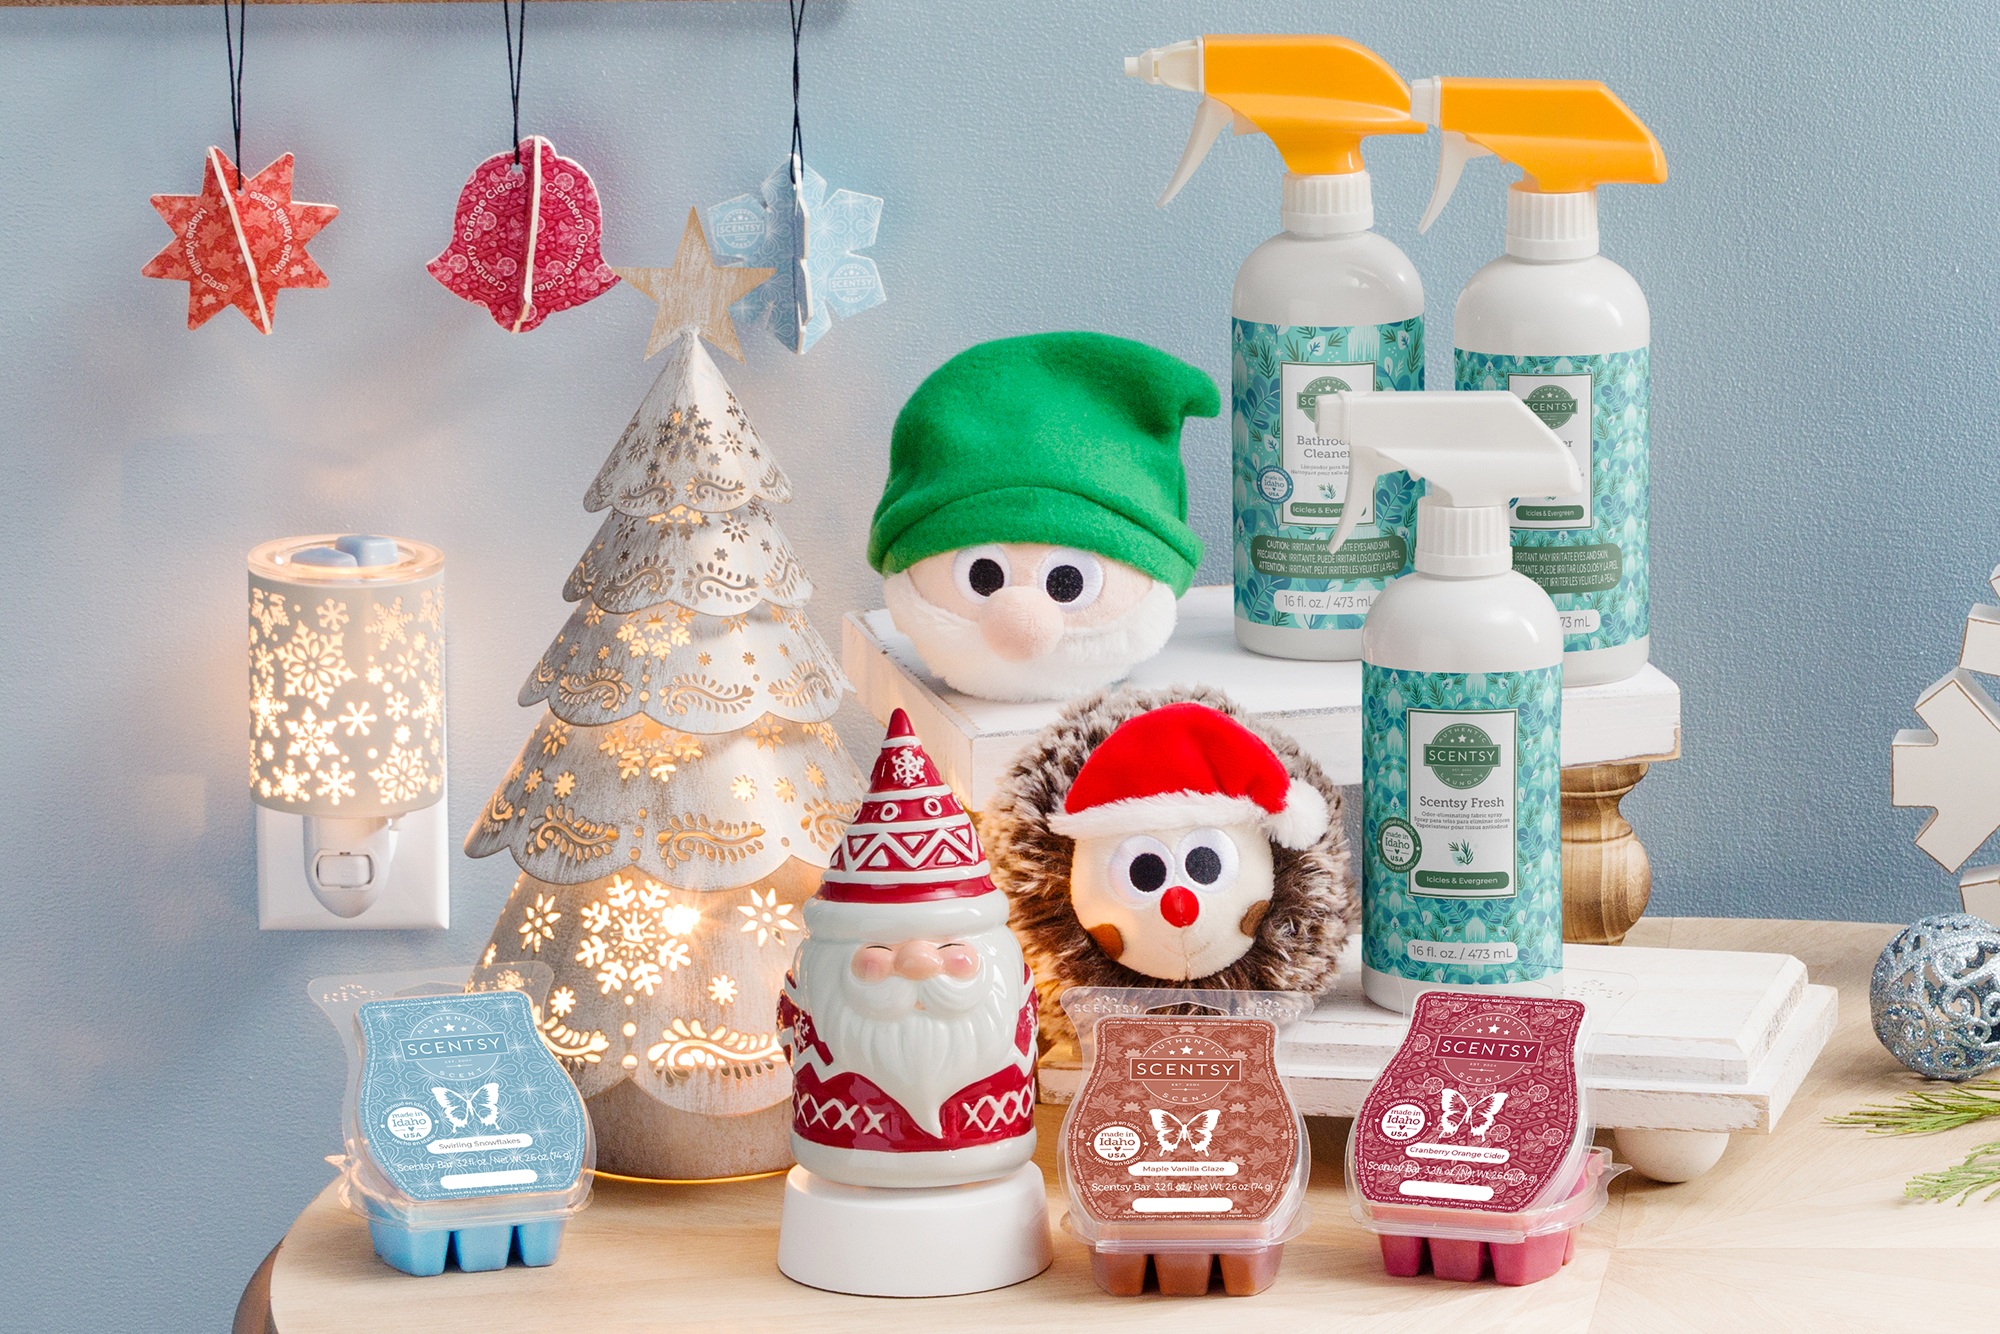 The 2022 Scentsy Holiday Collection is here! Here we have the Icicles & Evergreen cleaning products, Holiday 3D Scent Circle 3-pack, Holiday Scentsy Wax Bars, Gnome and Hedgehog Bitty Buddies, Trim the Tree Wax Warmer and the Catching Snowflakes Mini Warmer